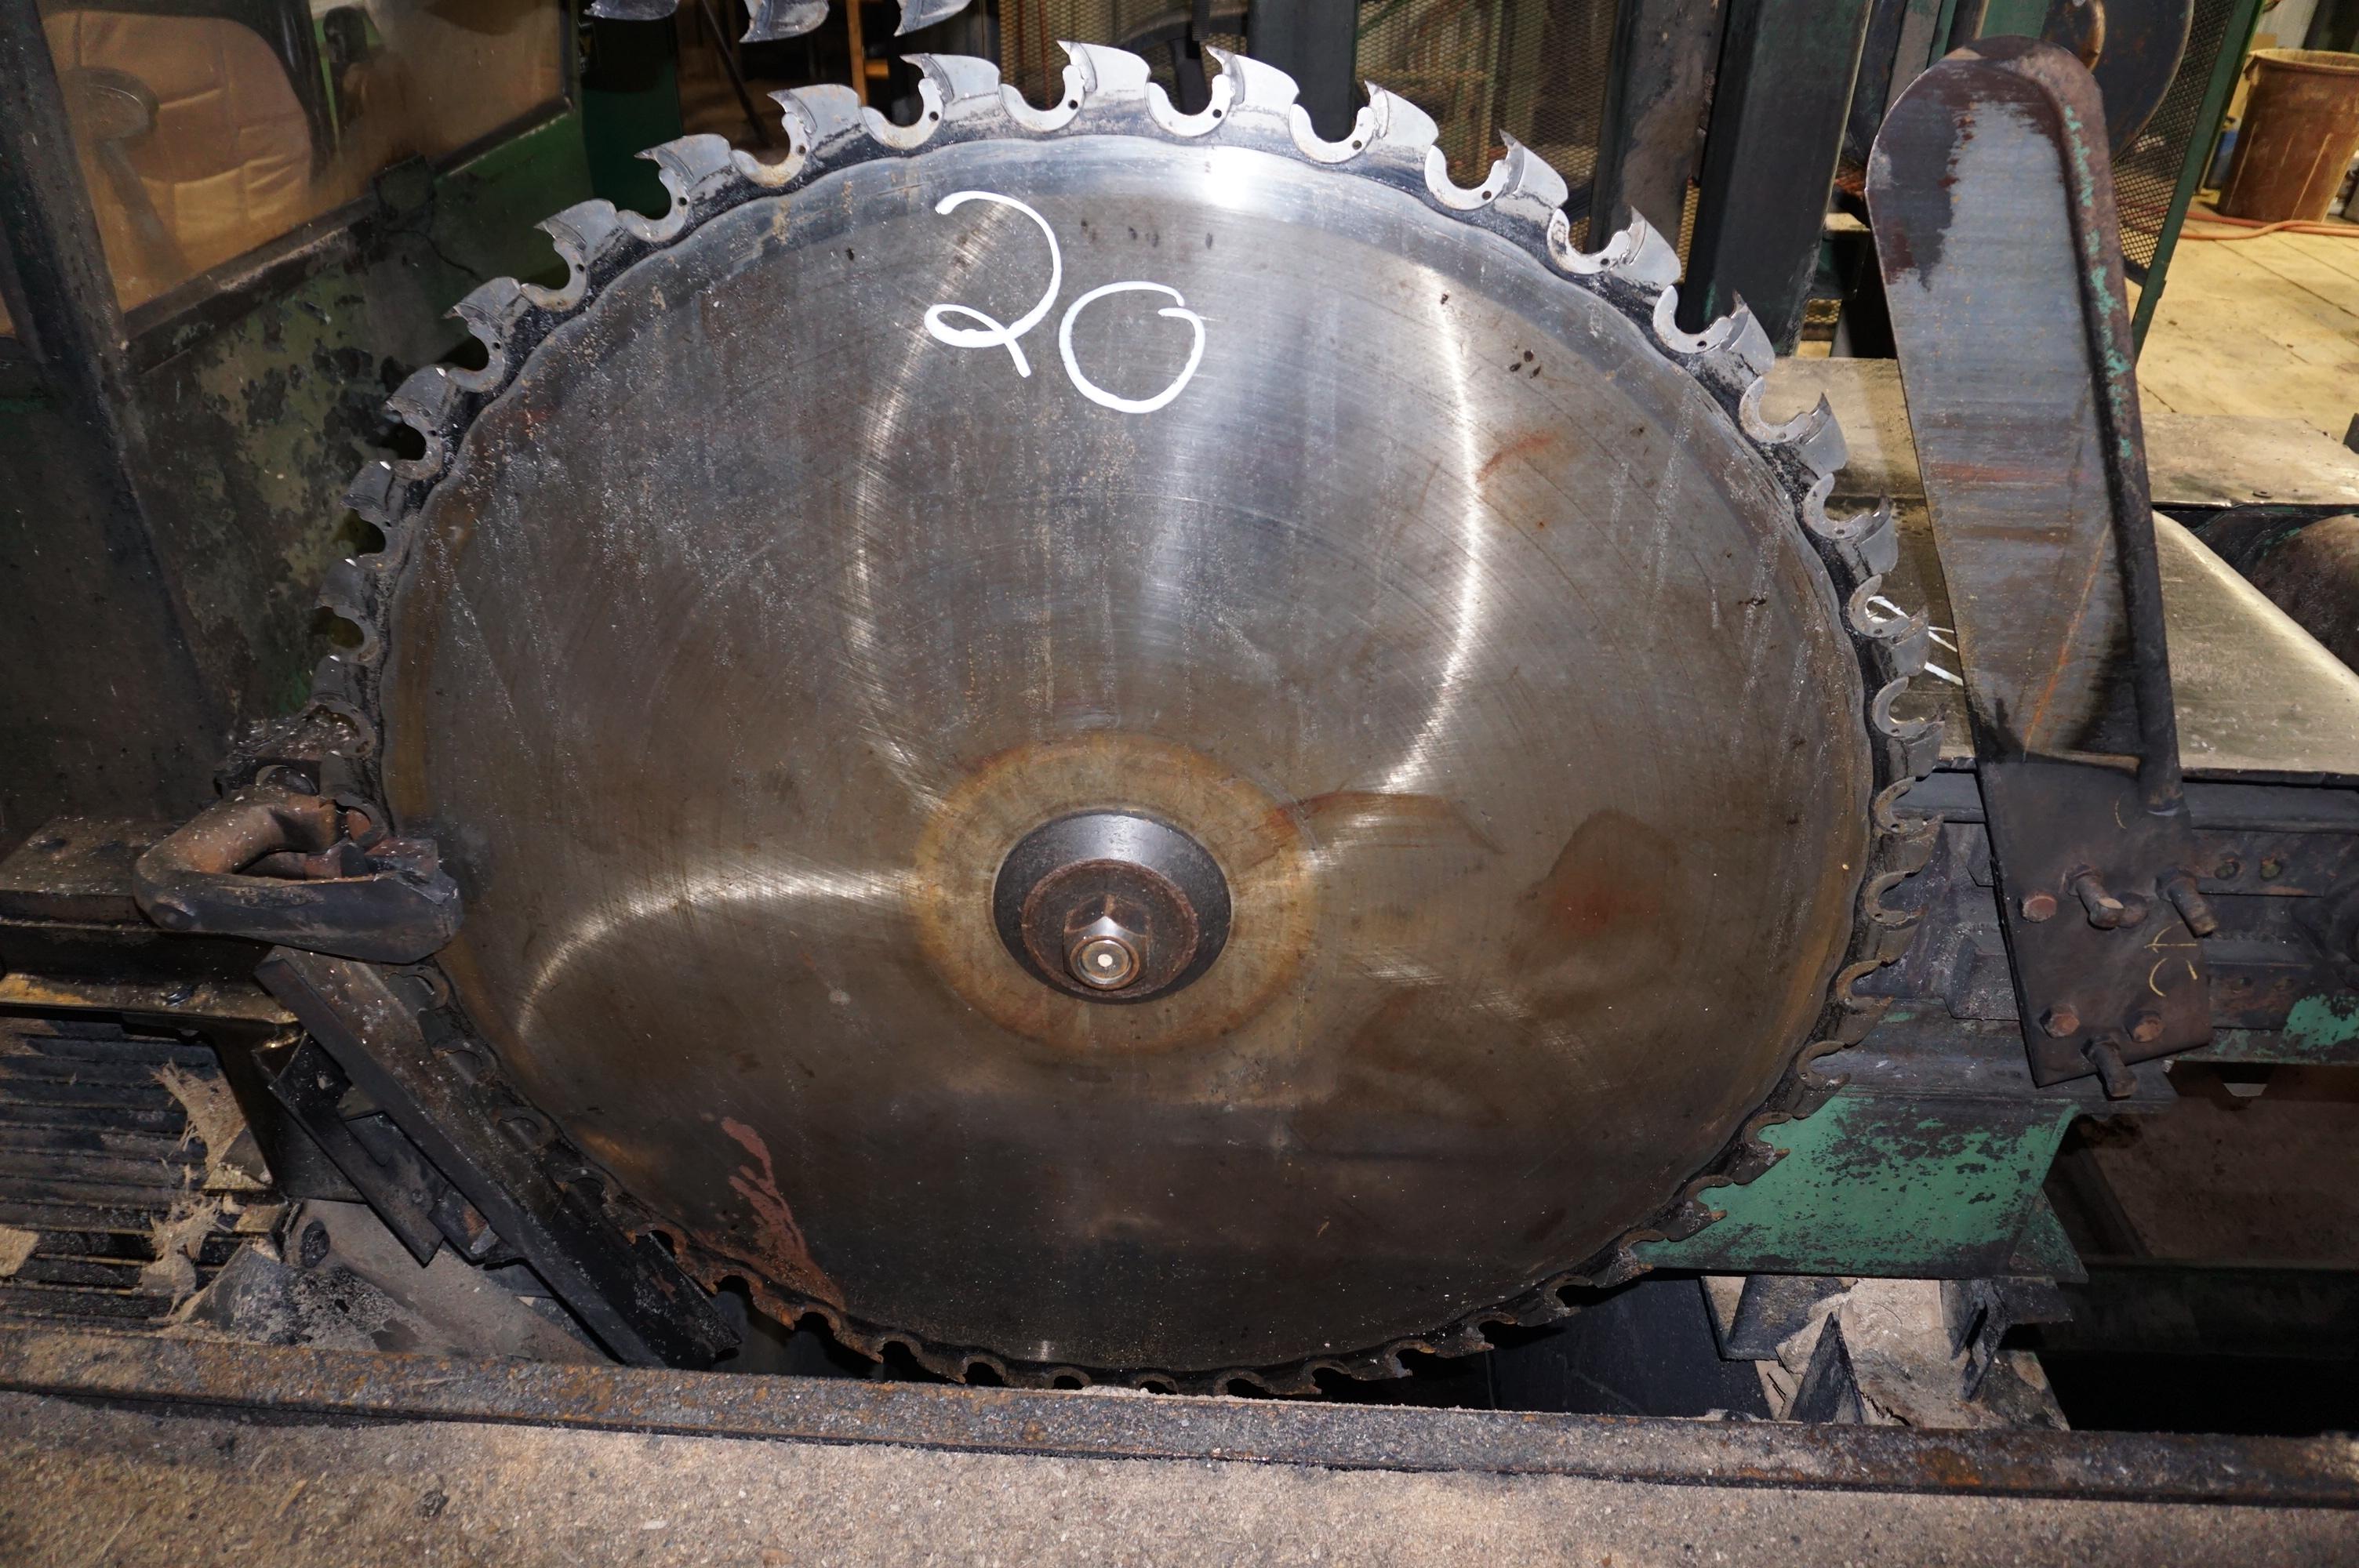 54" SAW ON MILL